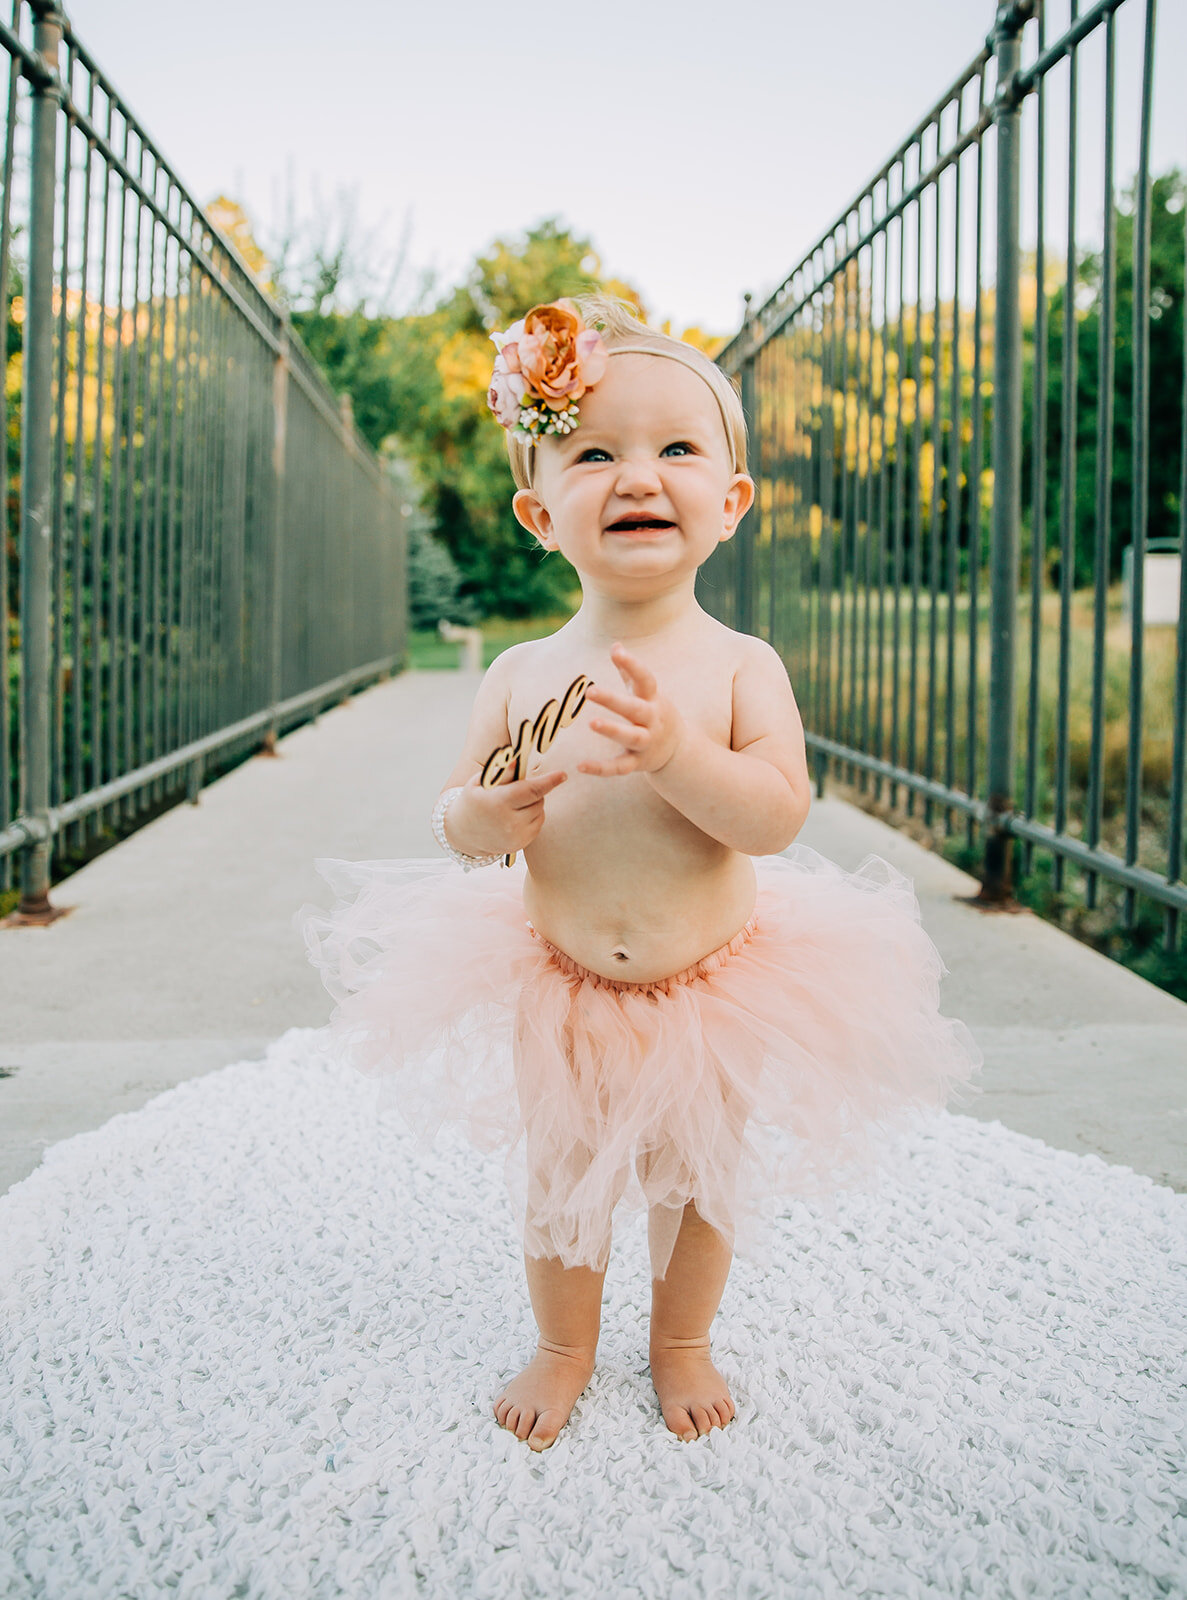  baby posing ideas first birthday baby outfit inspo kids fashion inspo girl power happy face photoshoot props wooden prop inspo small hands holding props one year old turning one pretty girl dancing girl pink tutu baby jewelry kids photographer Logan